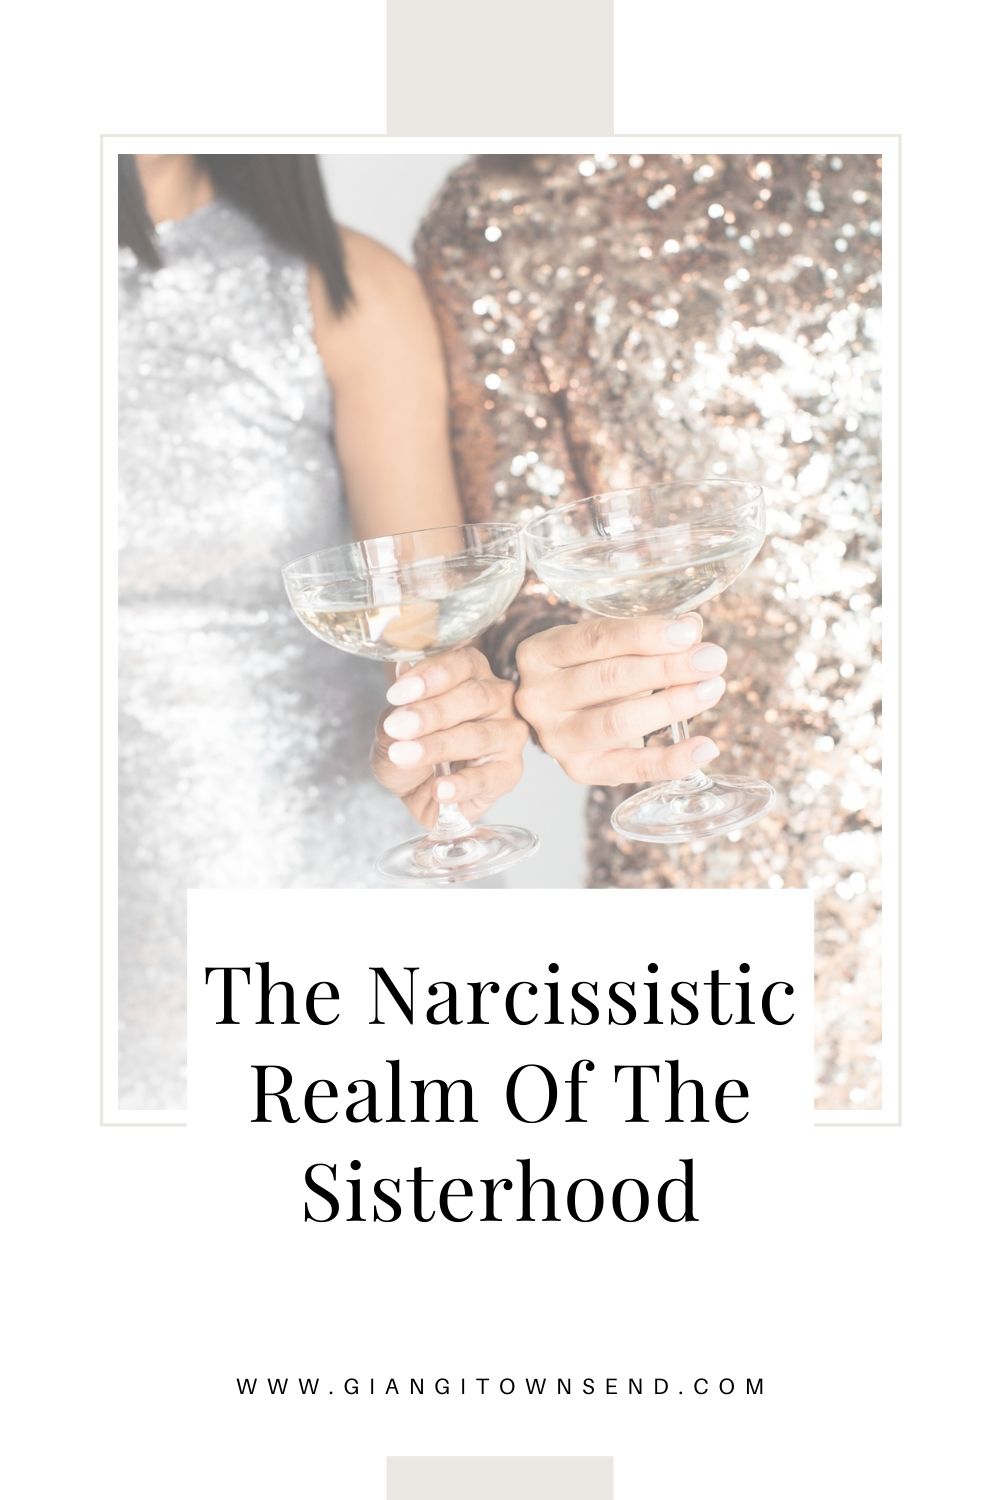 The Narcissistic Realm Of The Sisterhood